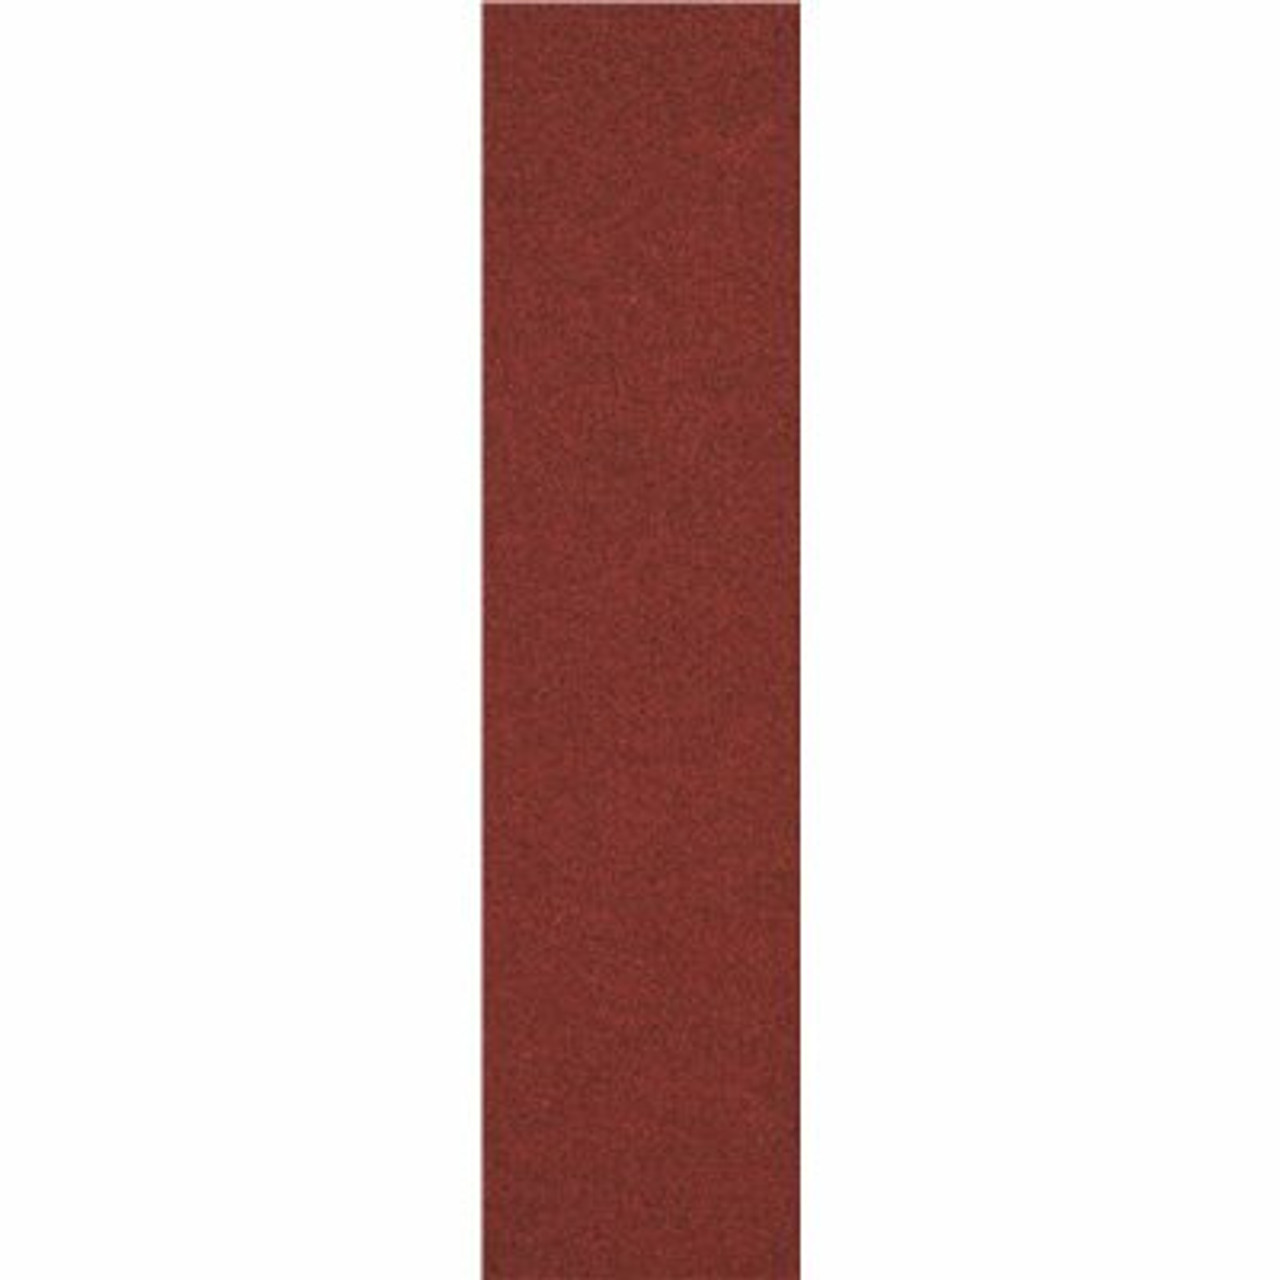 Foss Peel And Stick Sangria Accent Planks 9 In. X 36 In. Commercial/Residential Carpet (8-Tile / Case)